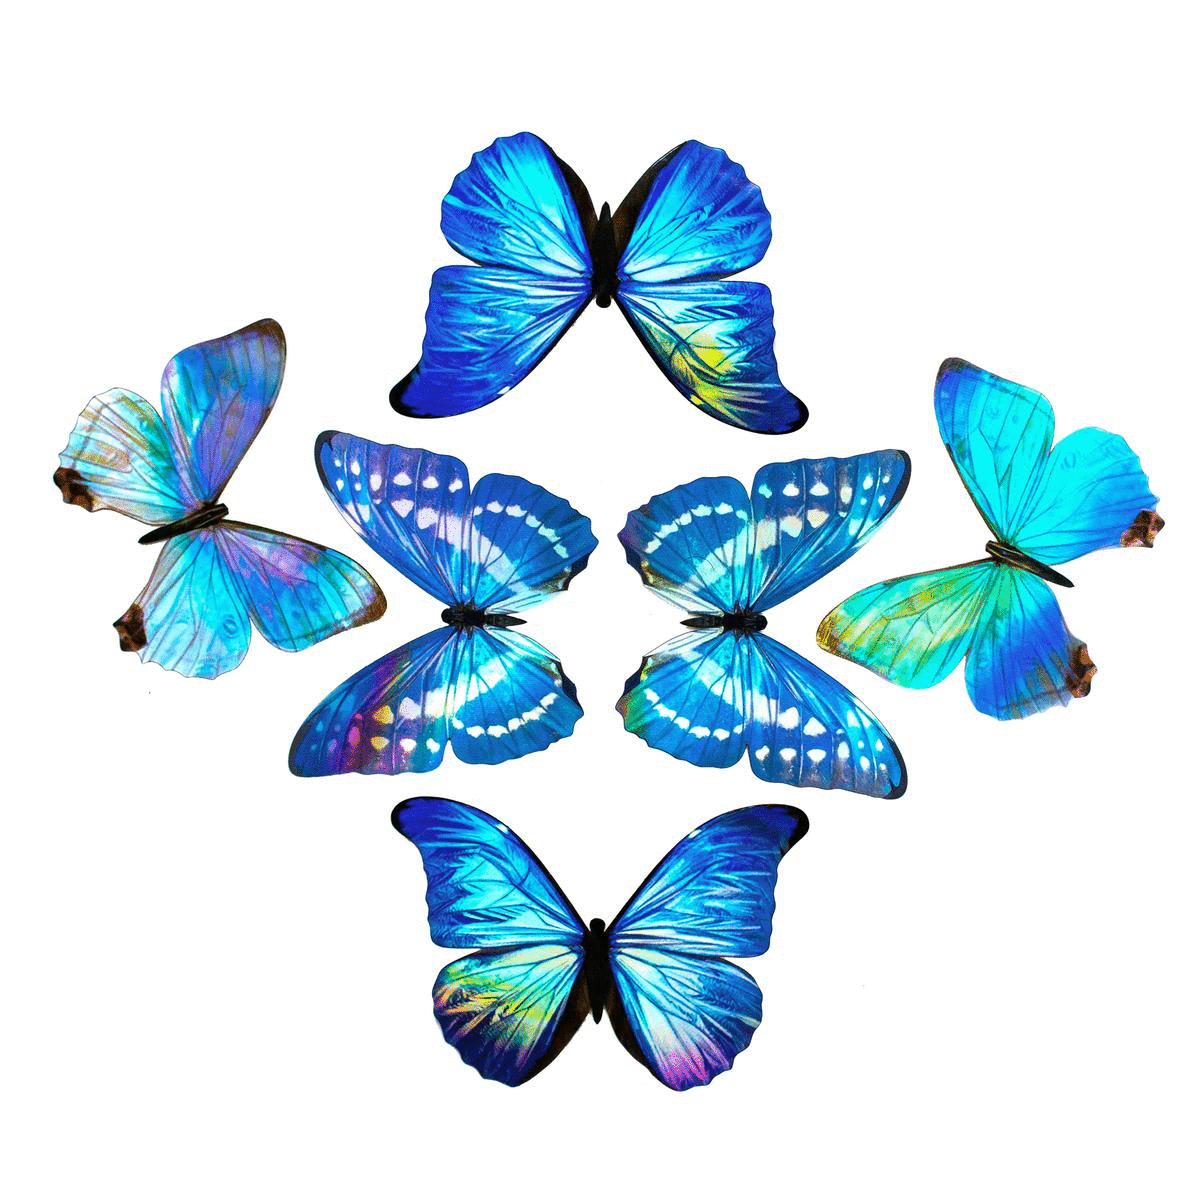 Holographic Morpho Butterfly Sticker Pack